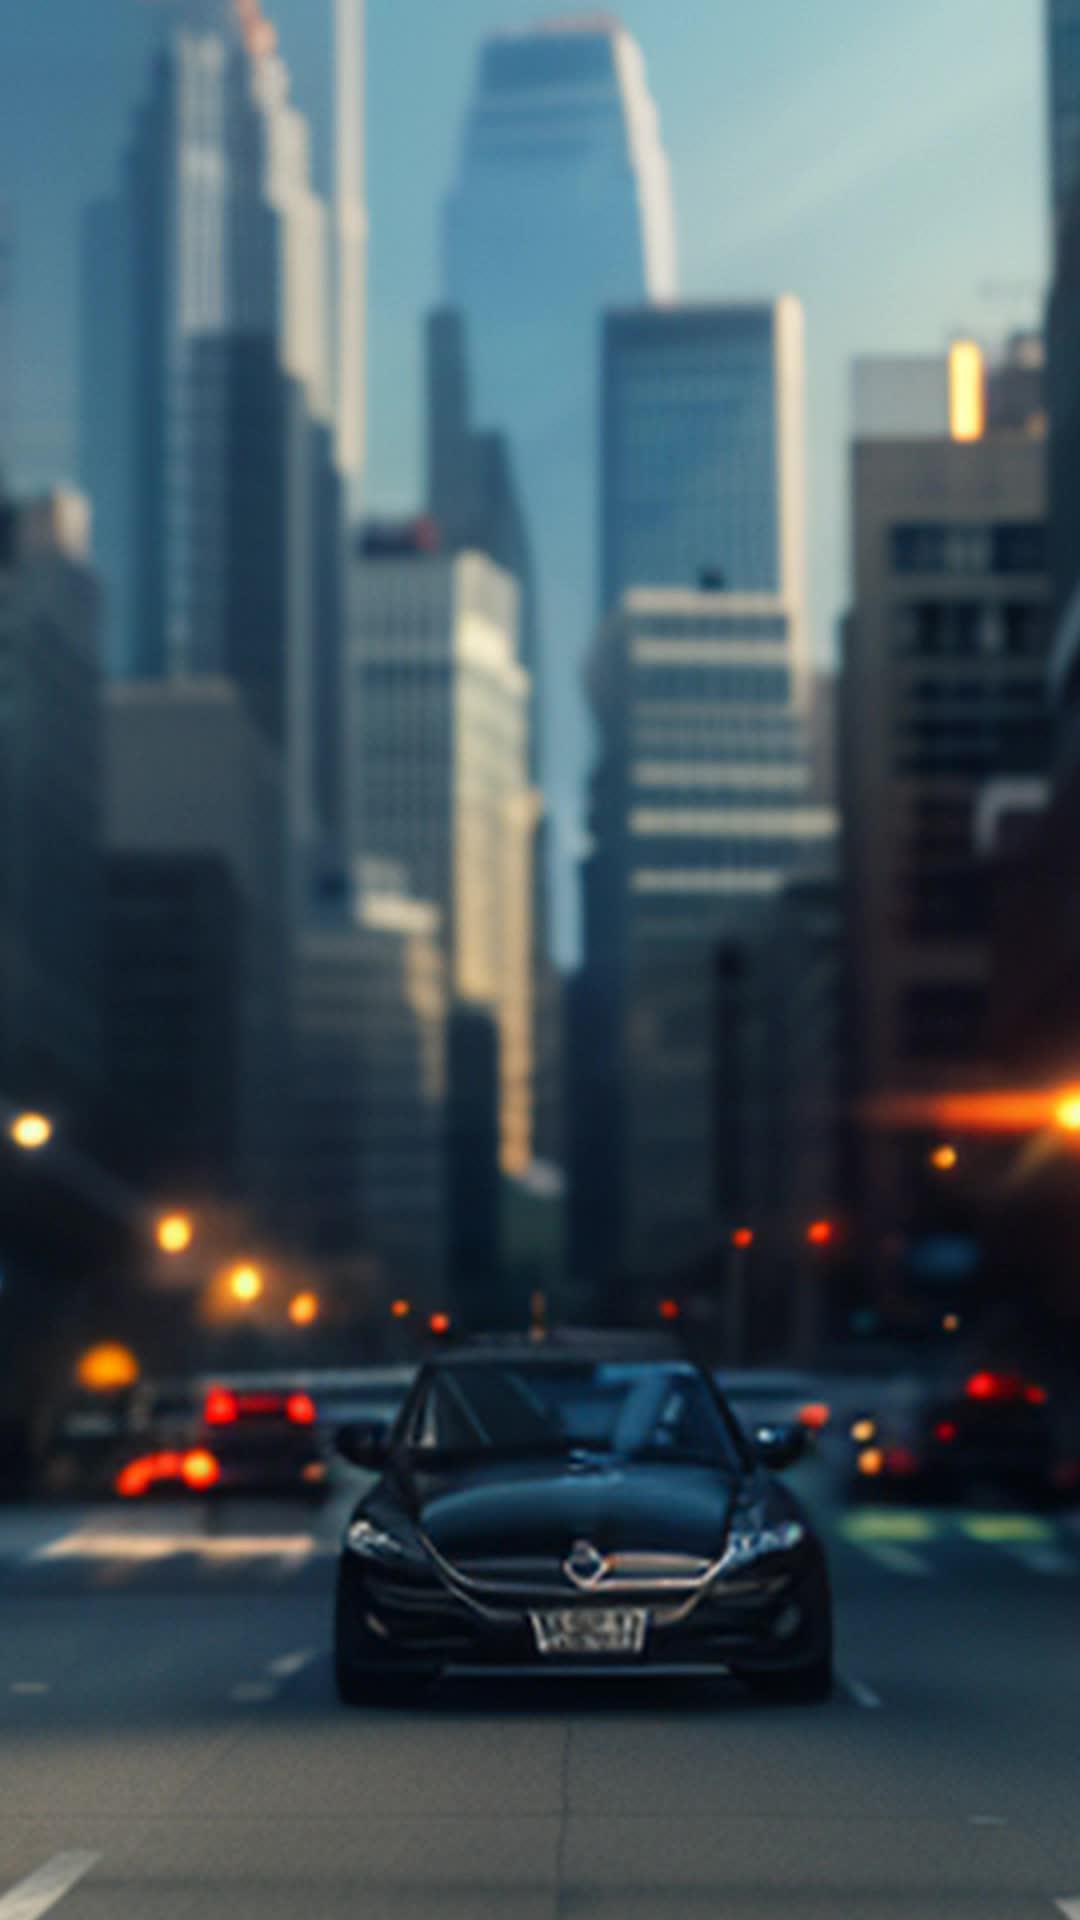 Jackson, young billionaire, behind tinted glasses, eyes flicker with determination, dodges bustling city traffic, racing mind, swift sports car, weaving between skyscrapers, pulse surges, outmaneuvering corporate rivals, scent of betrayal sharp as city air, calculated moves, high-stakes city game